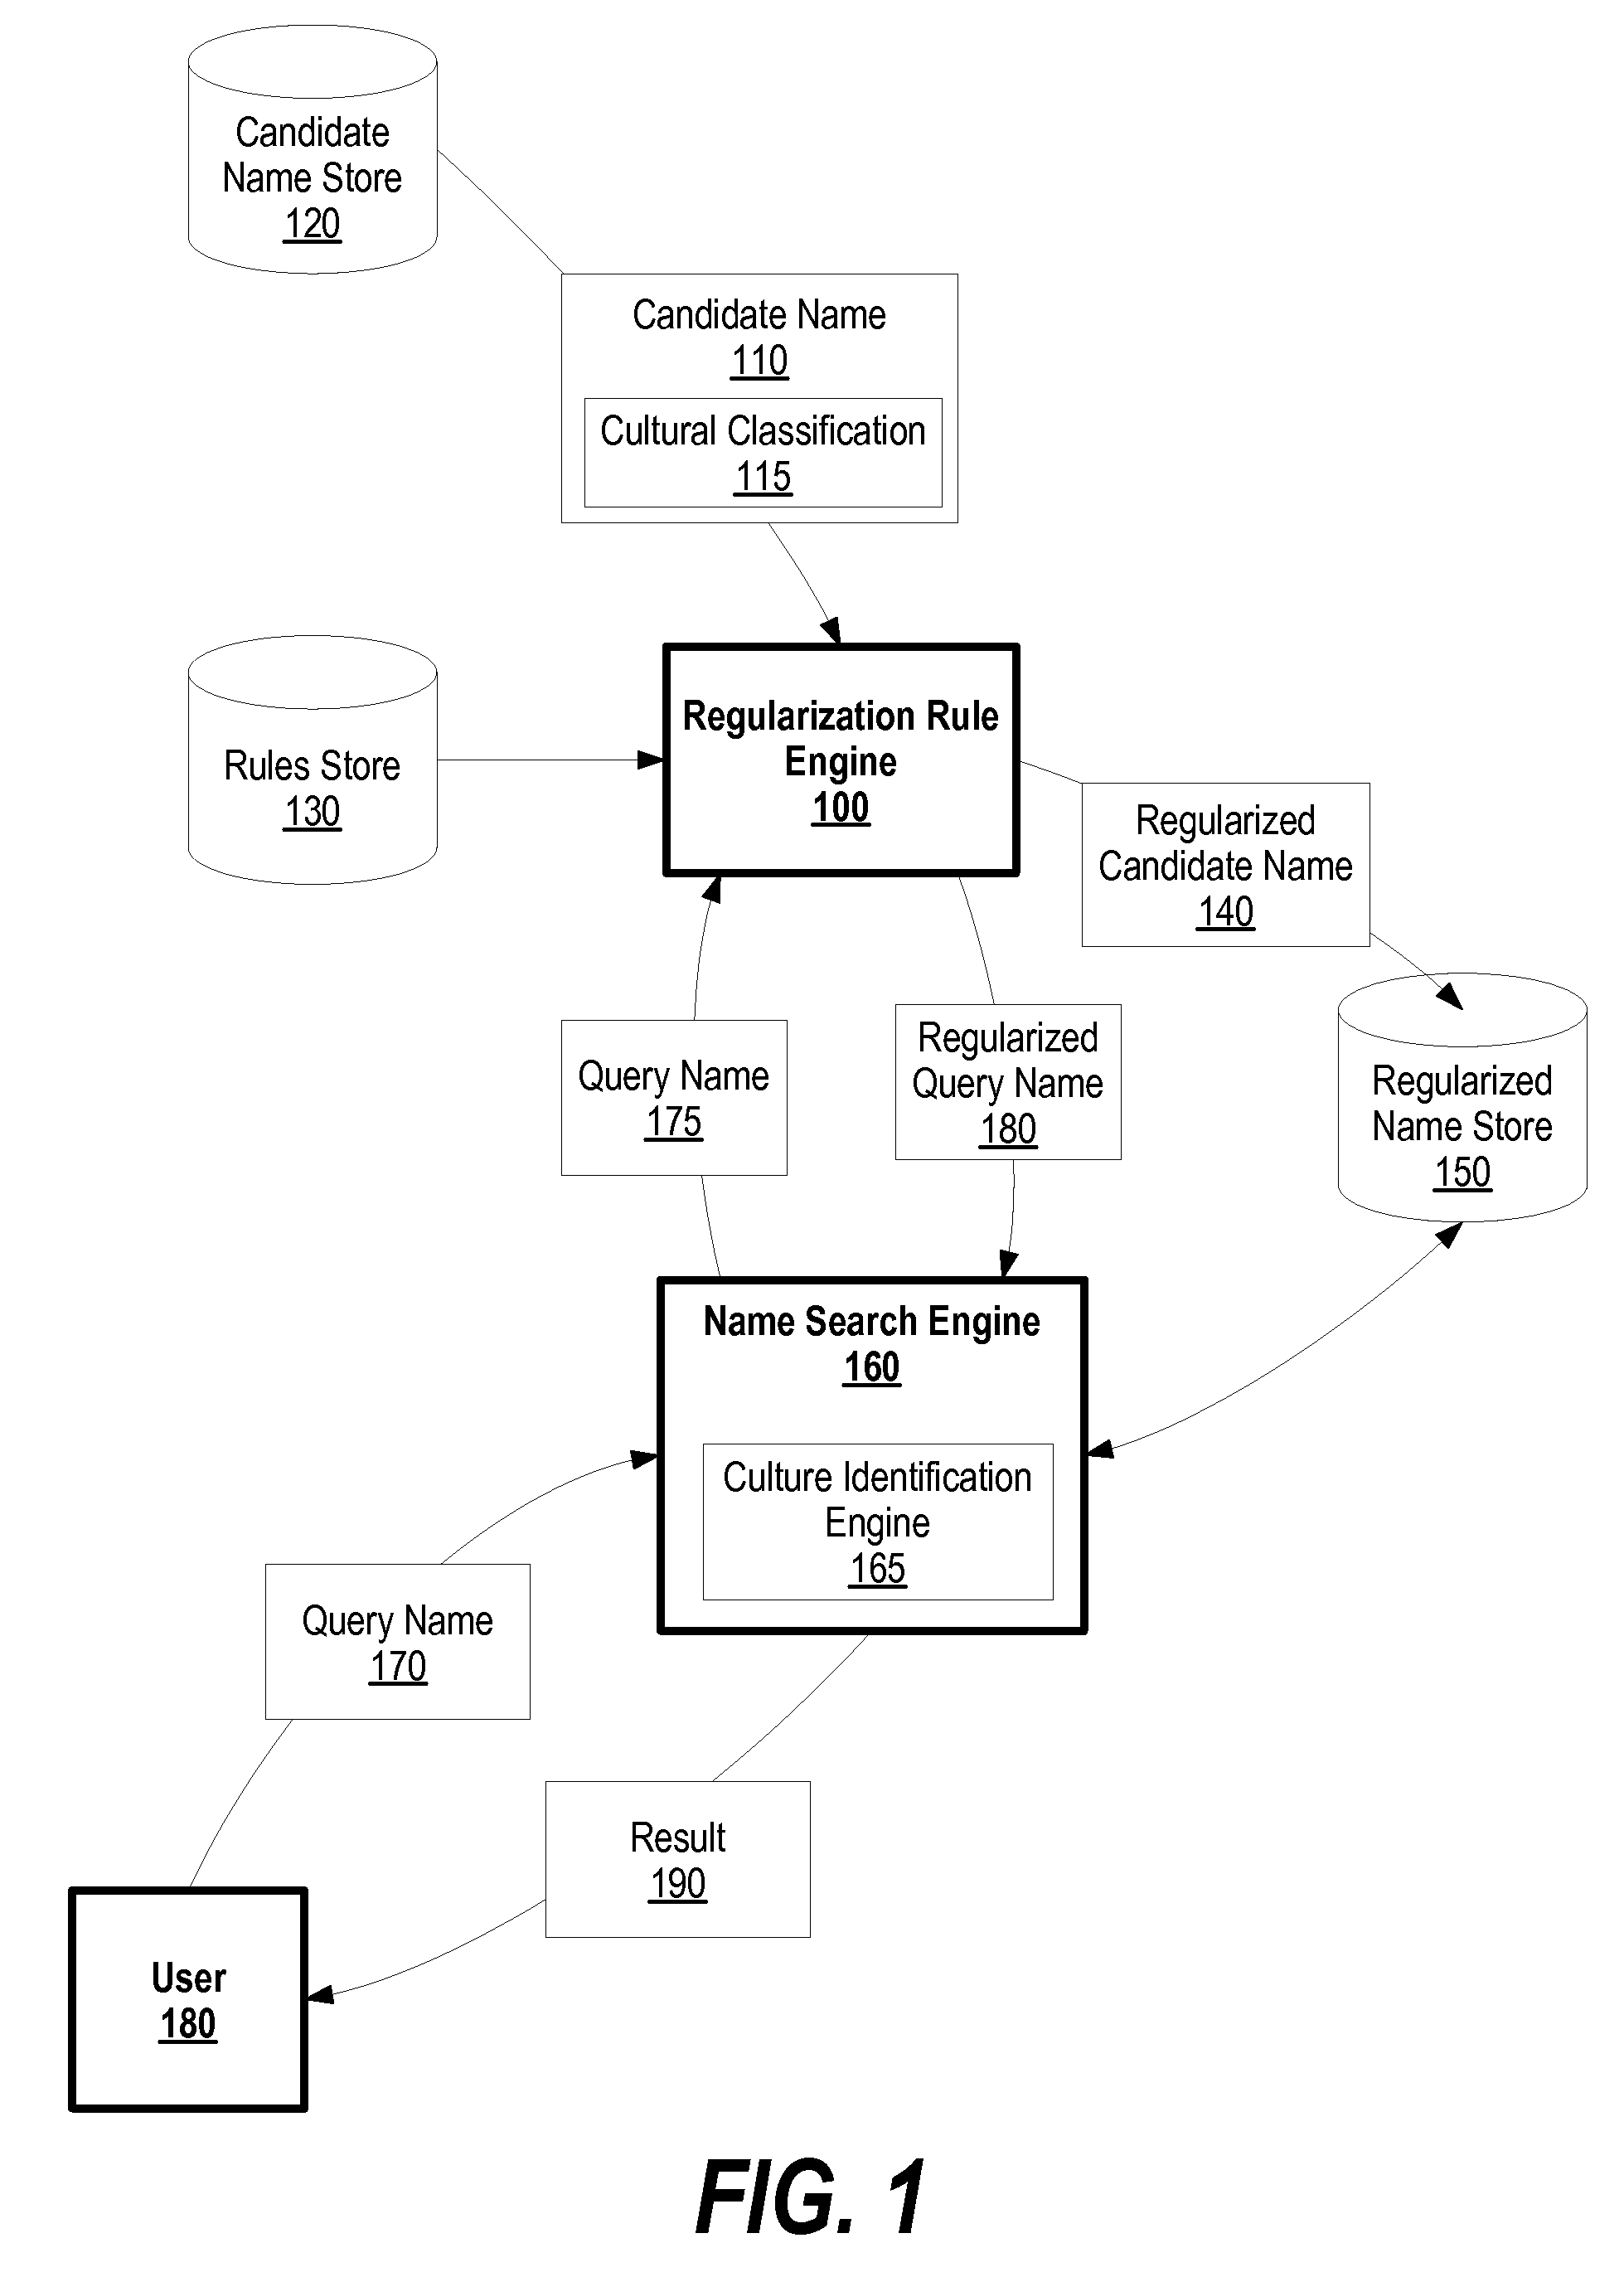 System and Method for Improved Name Matching Using Regularized Name Forms